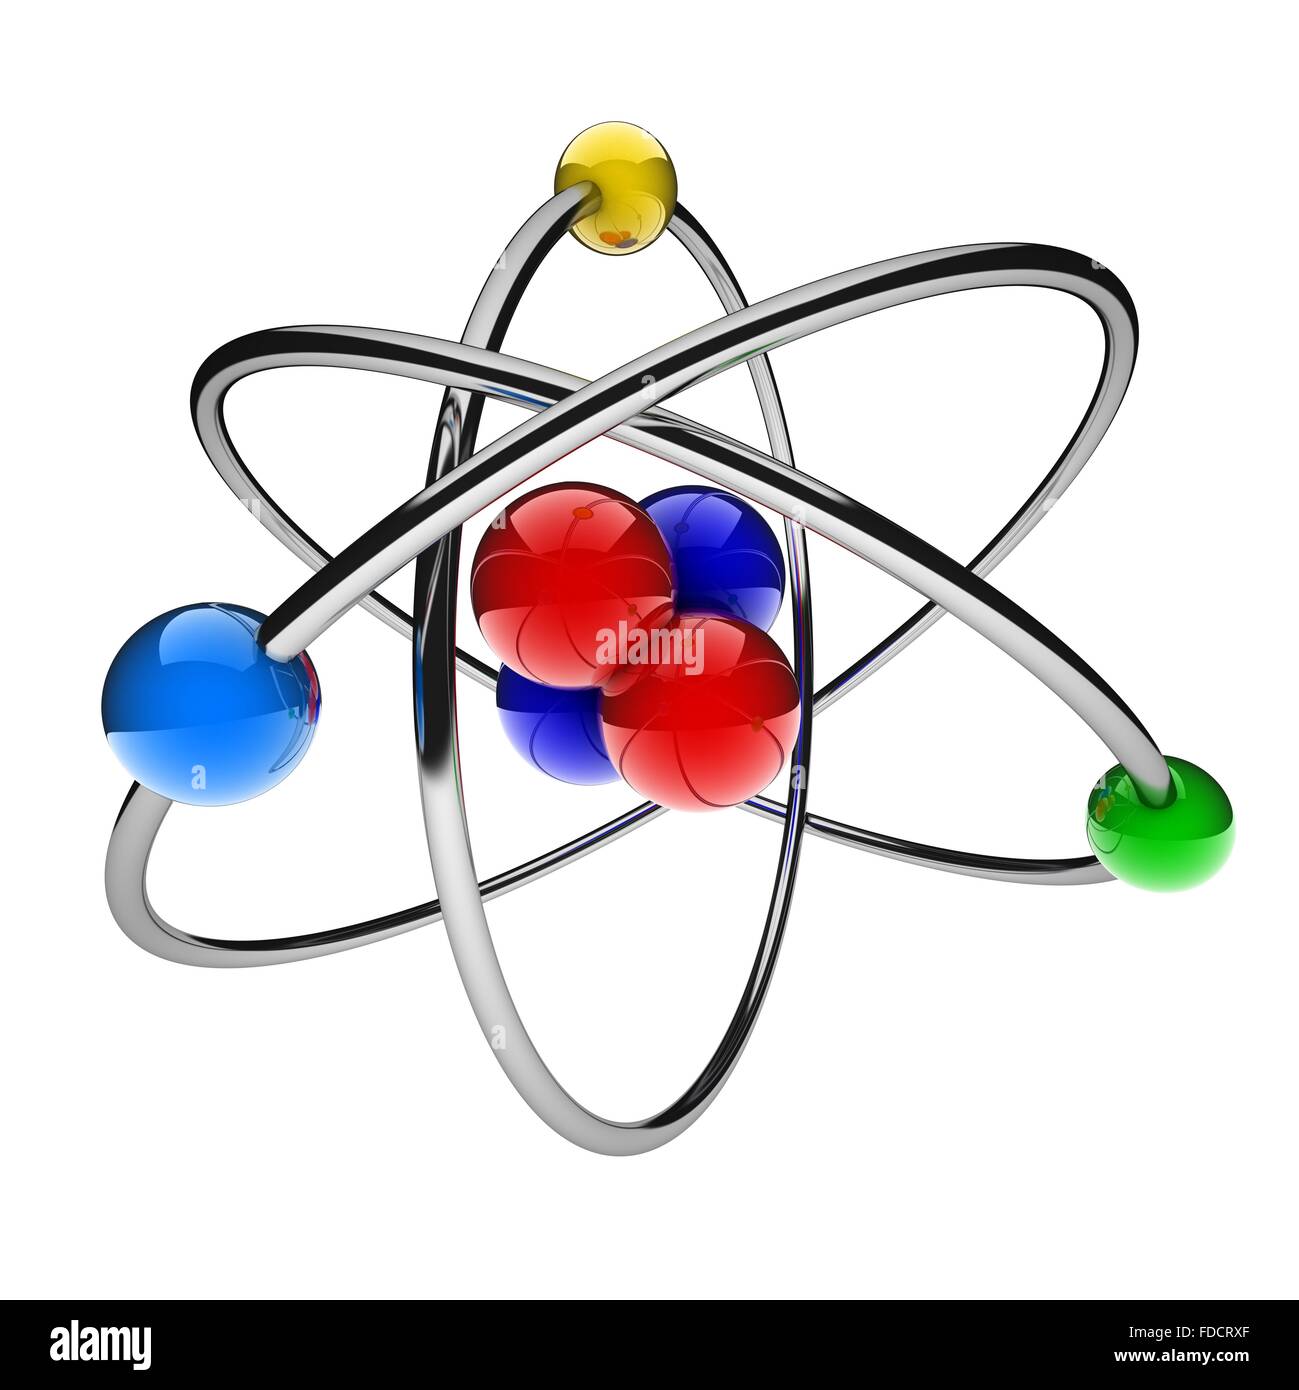 Abstract atom cgi (done in 3d, isolated) Stock Photo